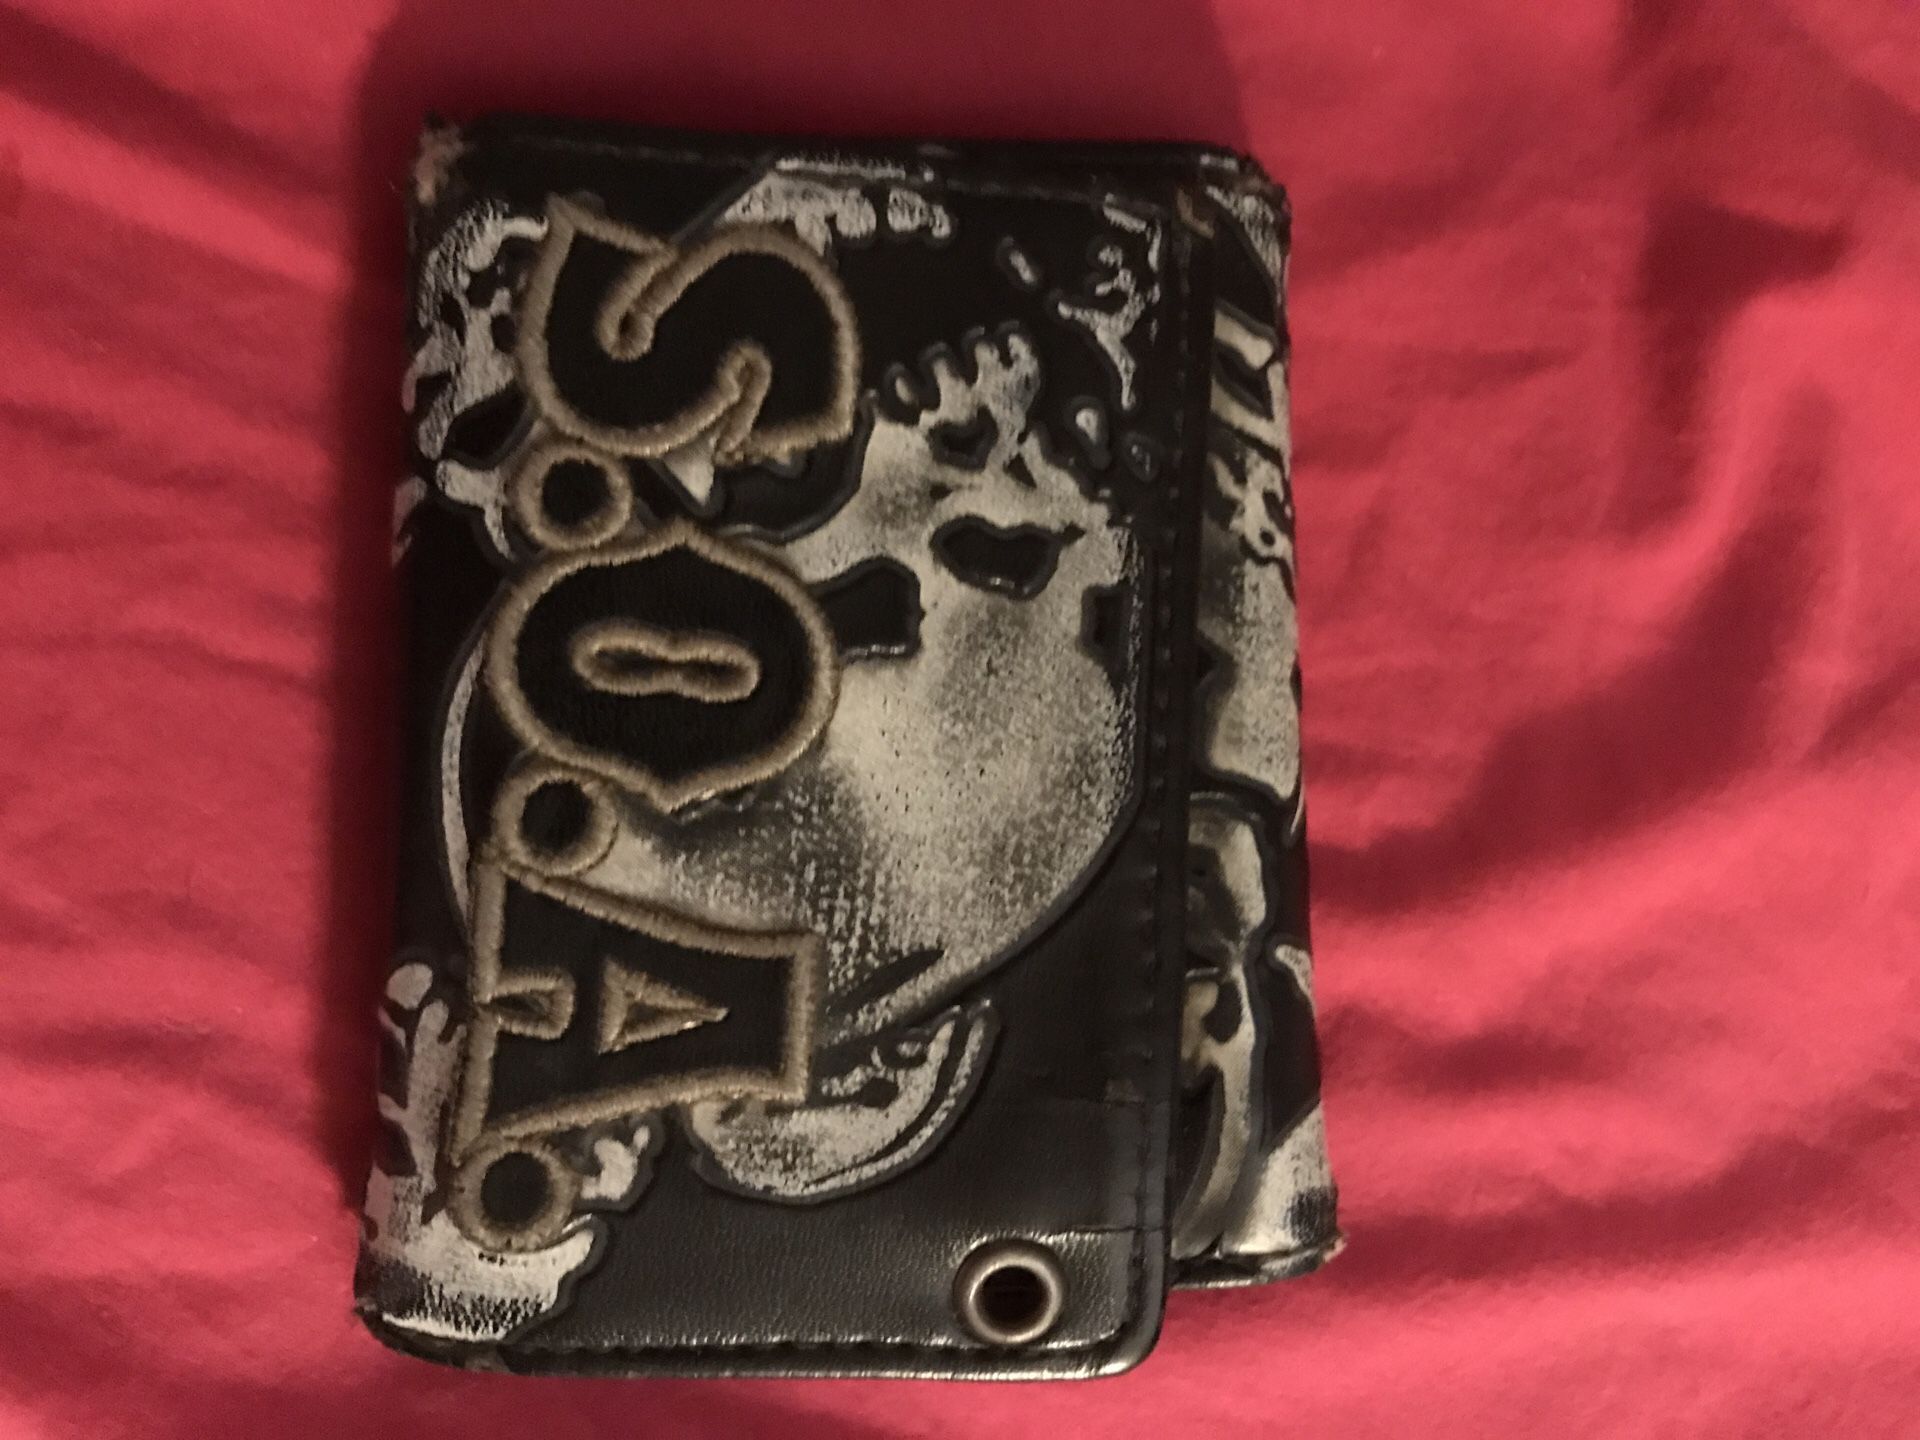 Sons of anarchy wallet